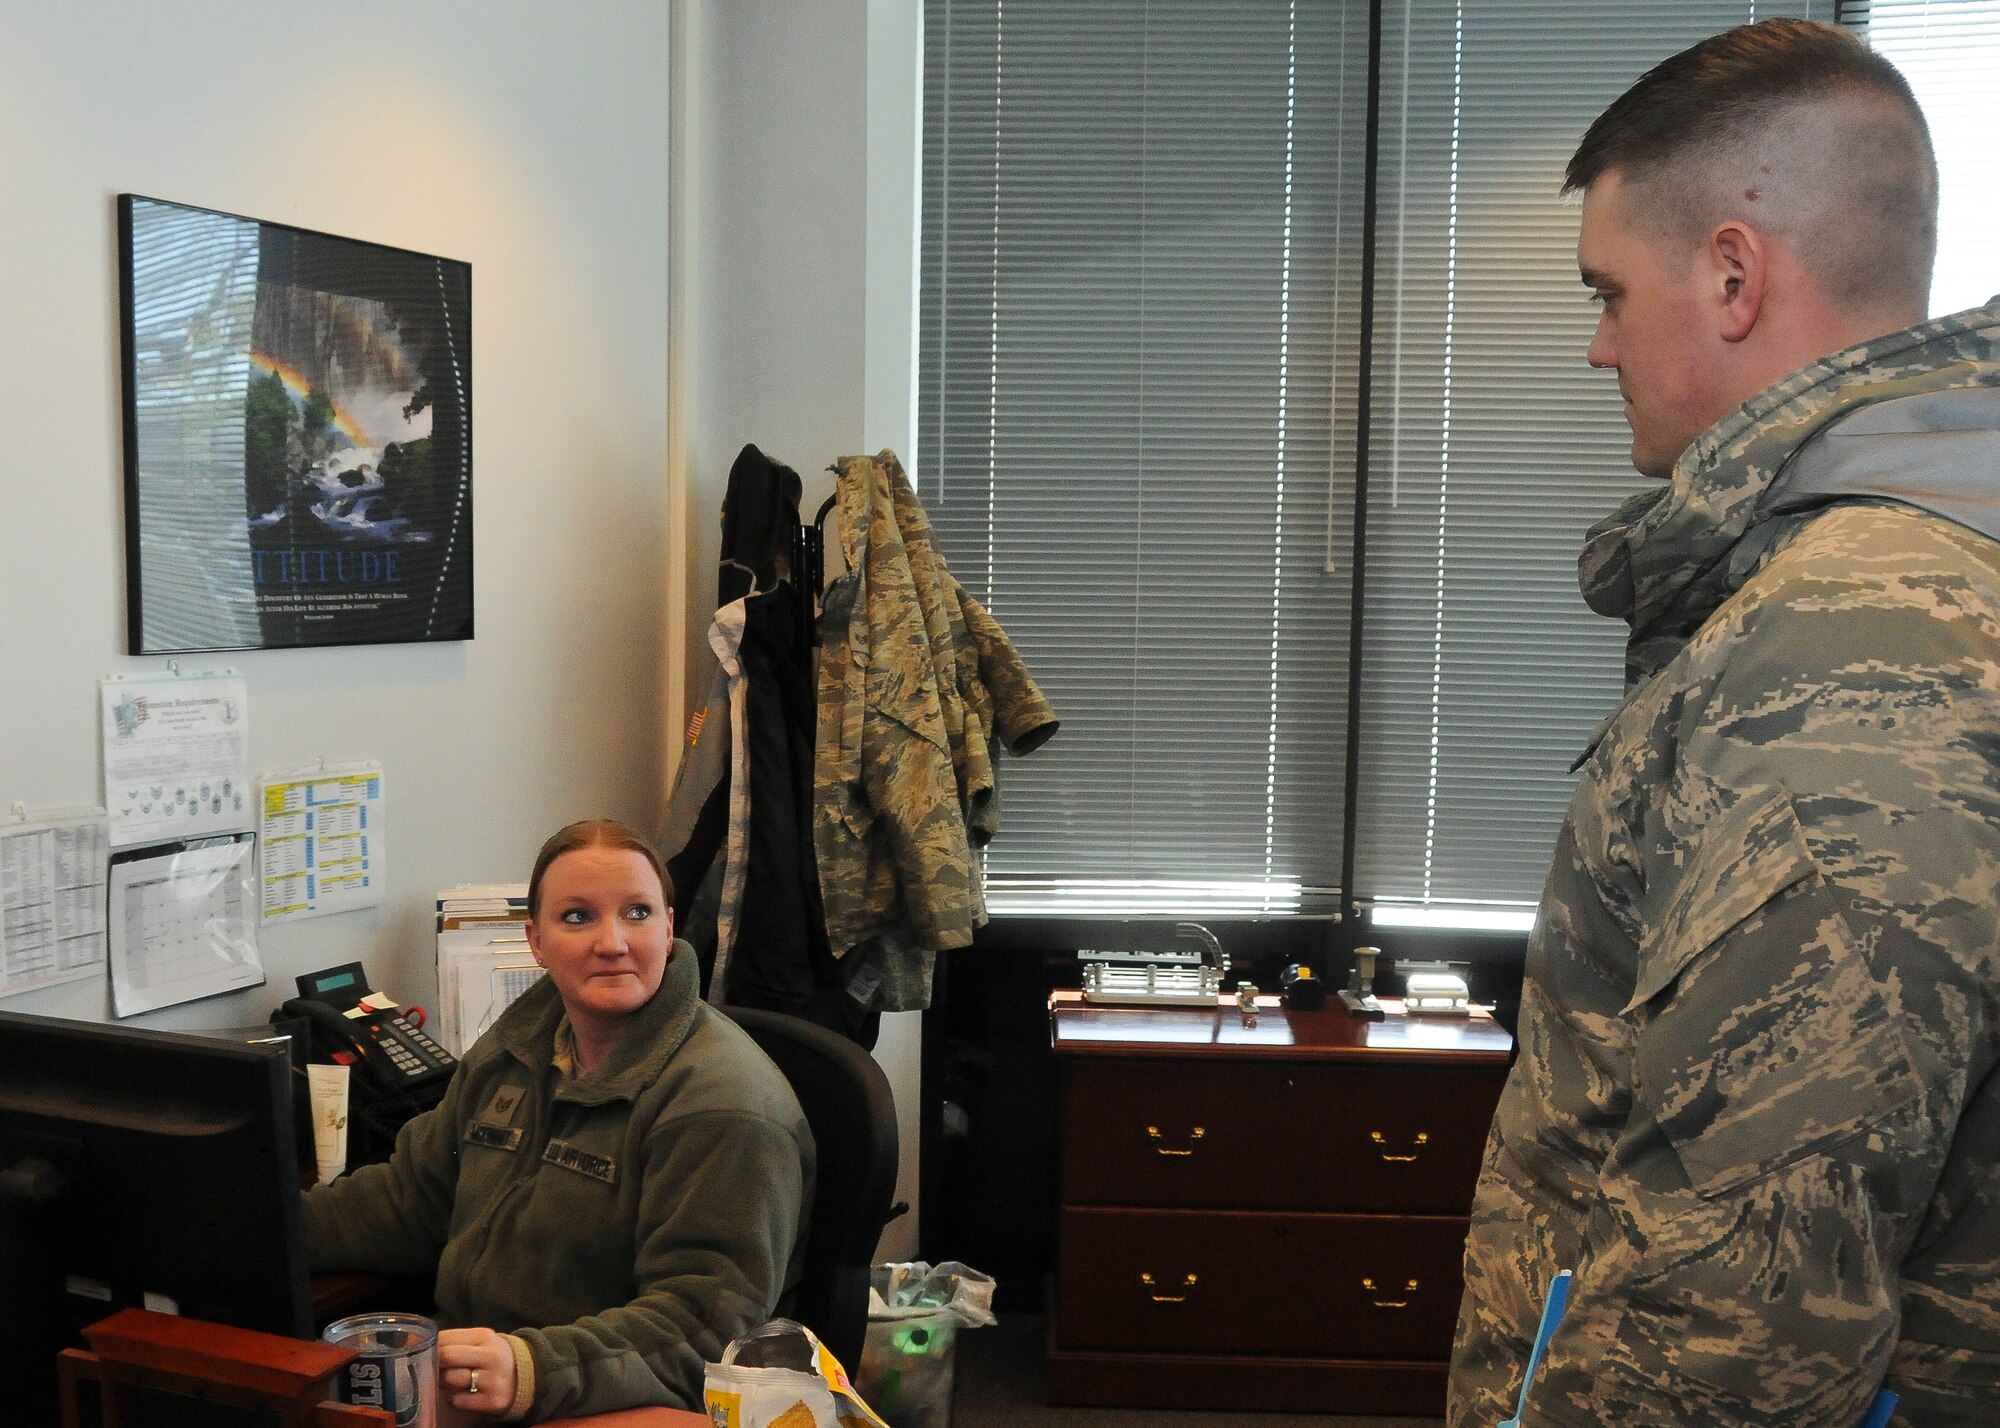 Master Sgt. Jason Mundt, 114th Inspector General program manager, questions Staff Sgt. Staci McKinney, 114th Logistics Readiness Squadron administrative support technician, about the Integrated Defense Exercise held at Joe Foss Field, Feb. 26, 2015. The IDE challenged the 114th Fighter Wing personnel on how they would react to a real world terrorist attack in the U.S. (National Guard photo by Staff Sgt. Luke Olson/Released)